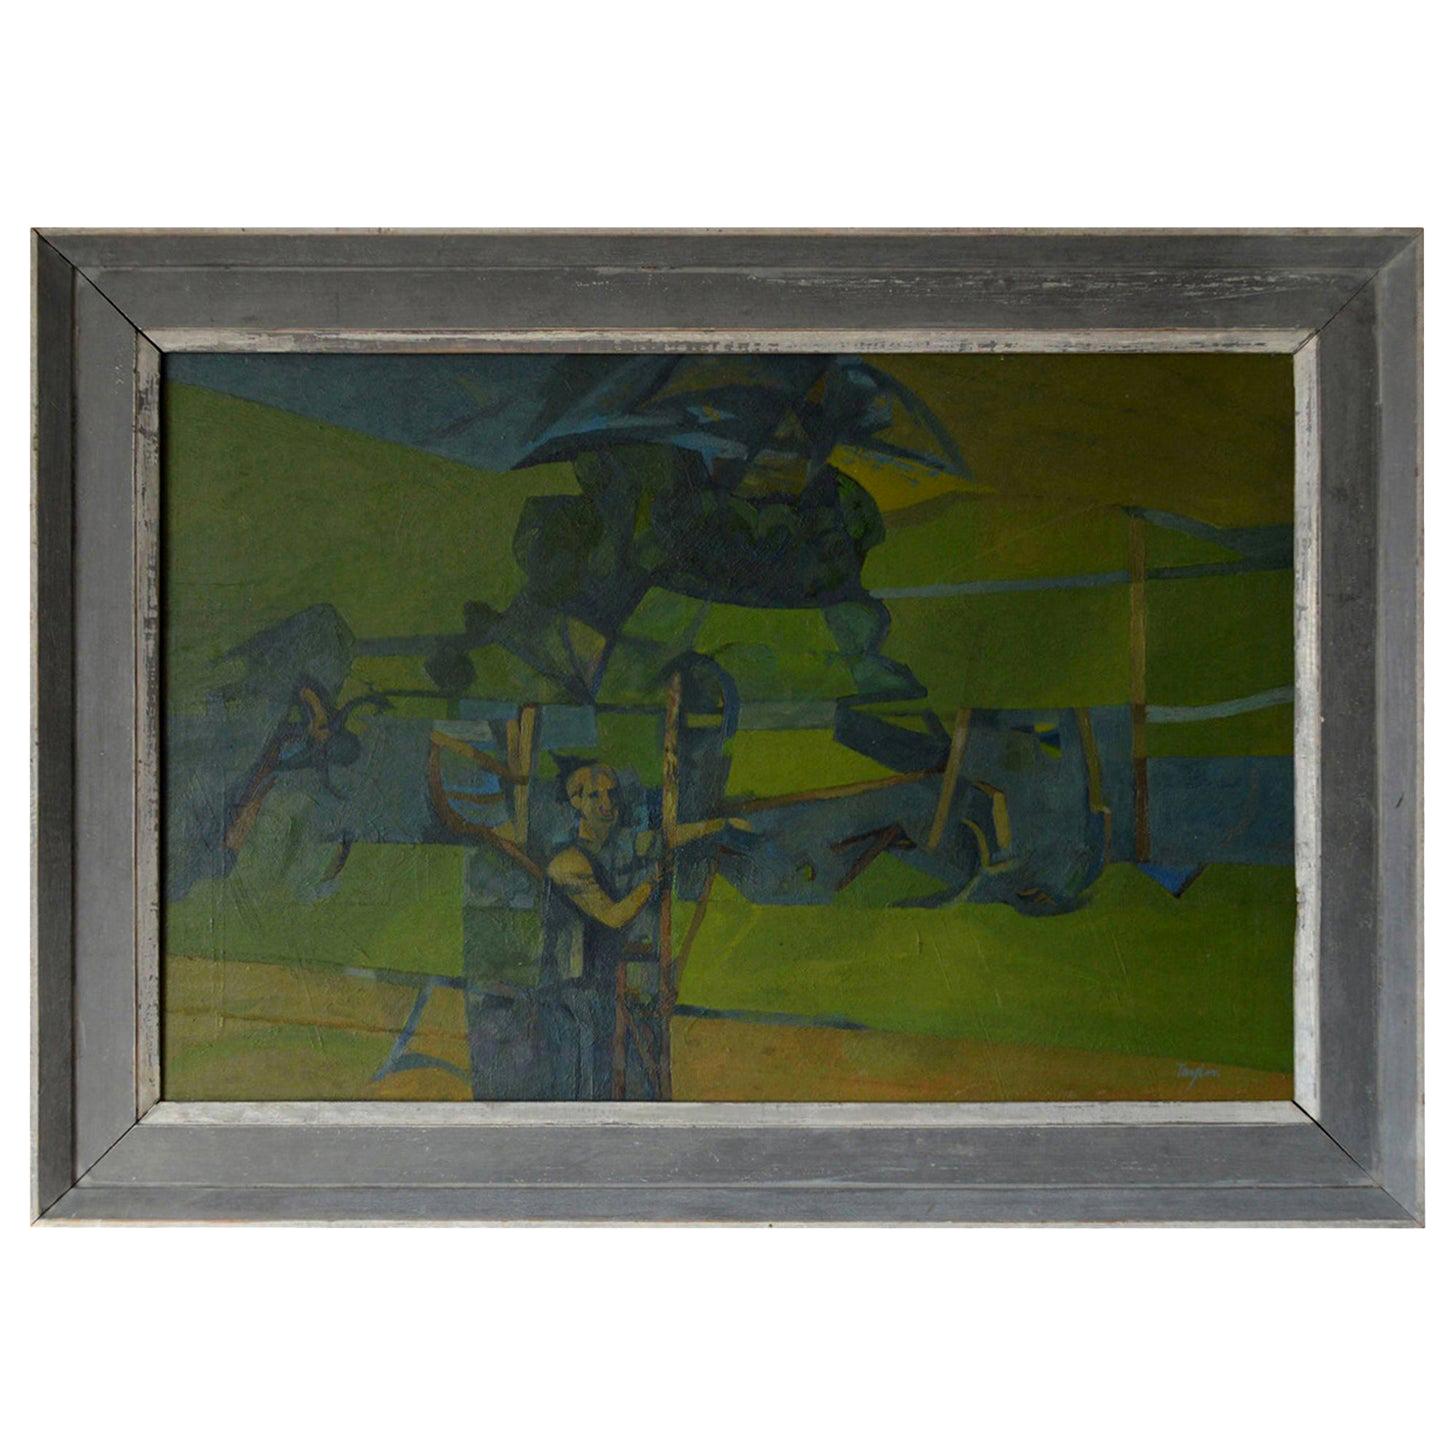 Great painting of a figure in an abstract landscape

By Yorkshire artist A. C. Taylor. In the style of Keith Vaughan.

Wonderful green colors 

Original painted frame

Oil on board.

Signed bottom right

The measurement given below is